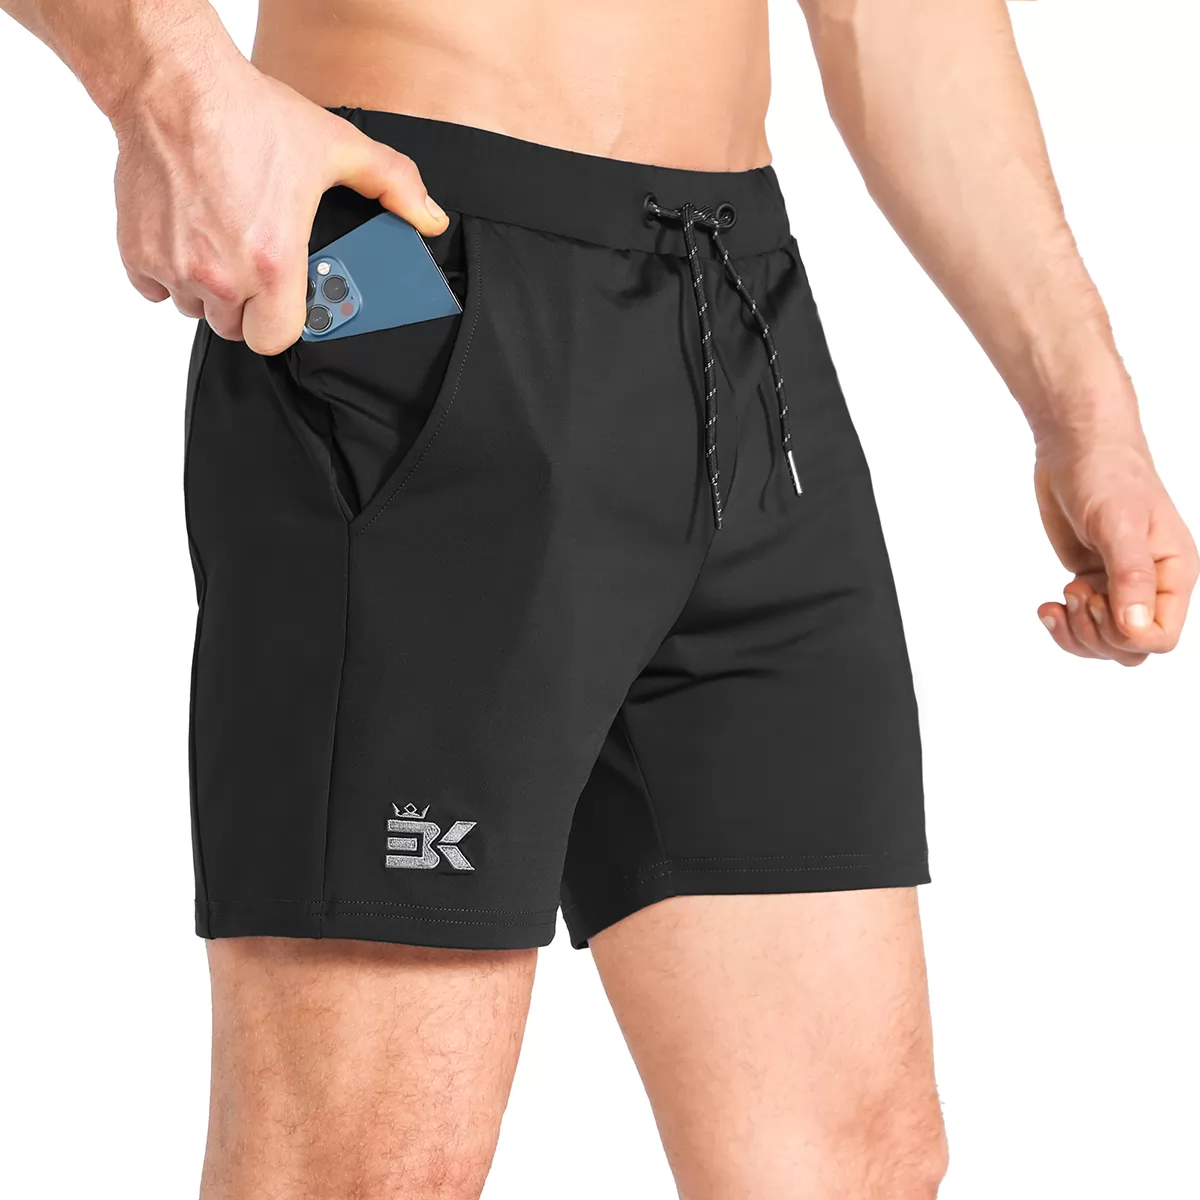 BROKIG Mens APEX Athletic Shorts with Zip Pockets,Breathable Sports Cool Fit Gym Training Shorts 